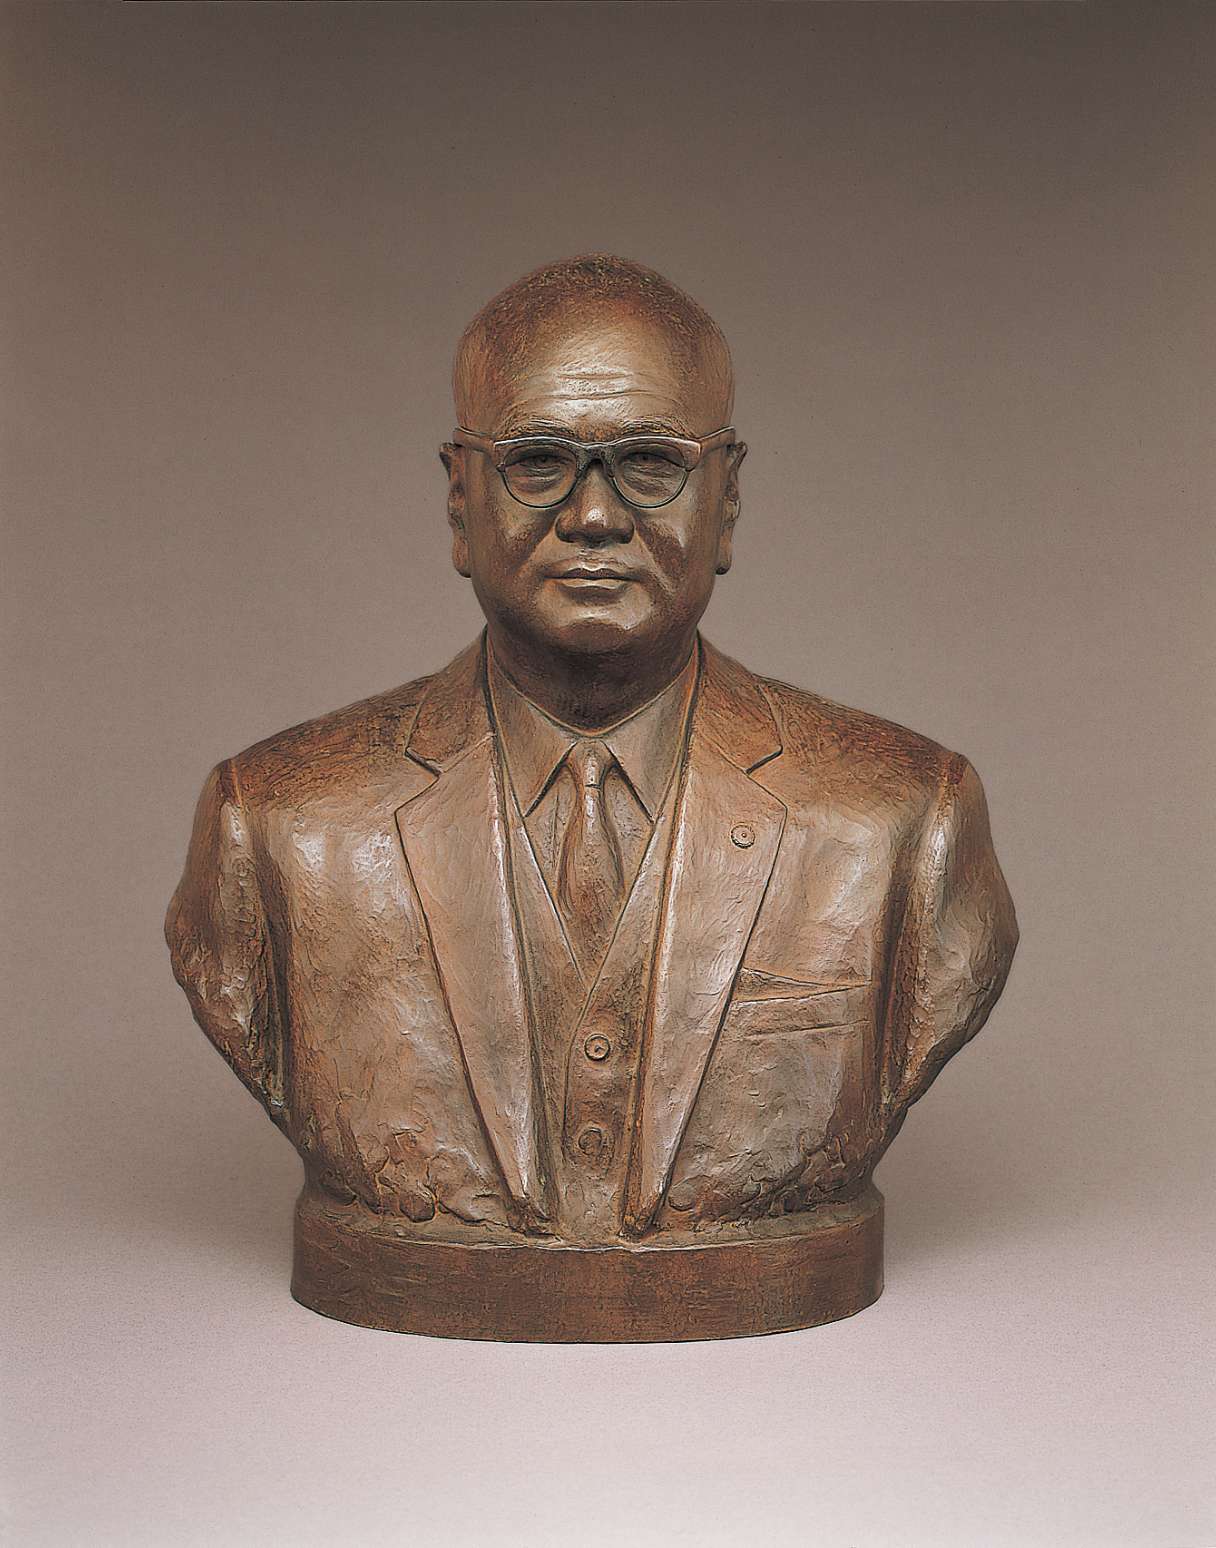 A brown hued bust of a bald, spectacled, middle-aged Japanese man wearing a suit and tie, his full cheeks, eyes, and mouth smiling slightly, with a few wrinkles visible on his forehead.